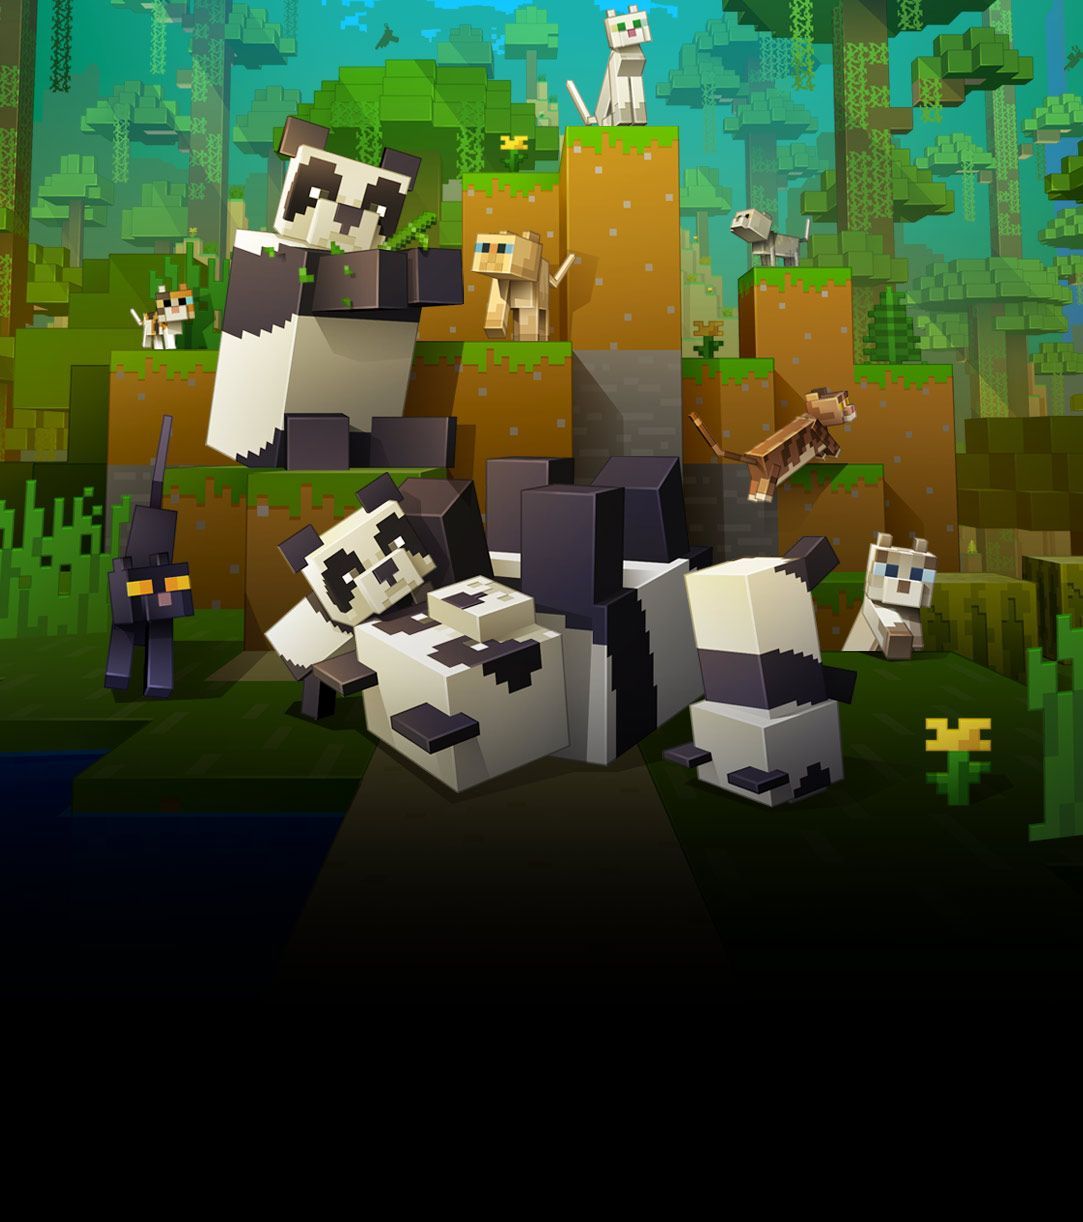 blocky cats and pandas on a minecraft landscape. Minecraft drawings, Minecraft picture, Minecraft wallpaper